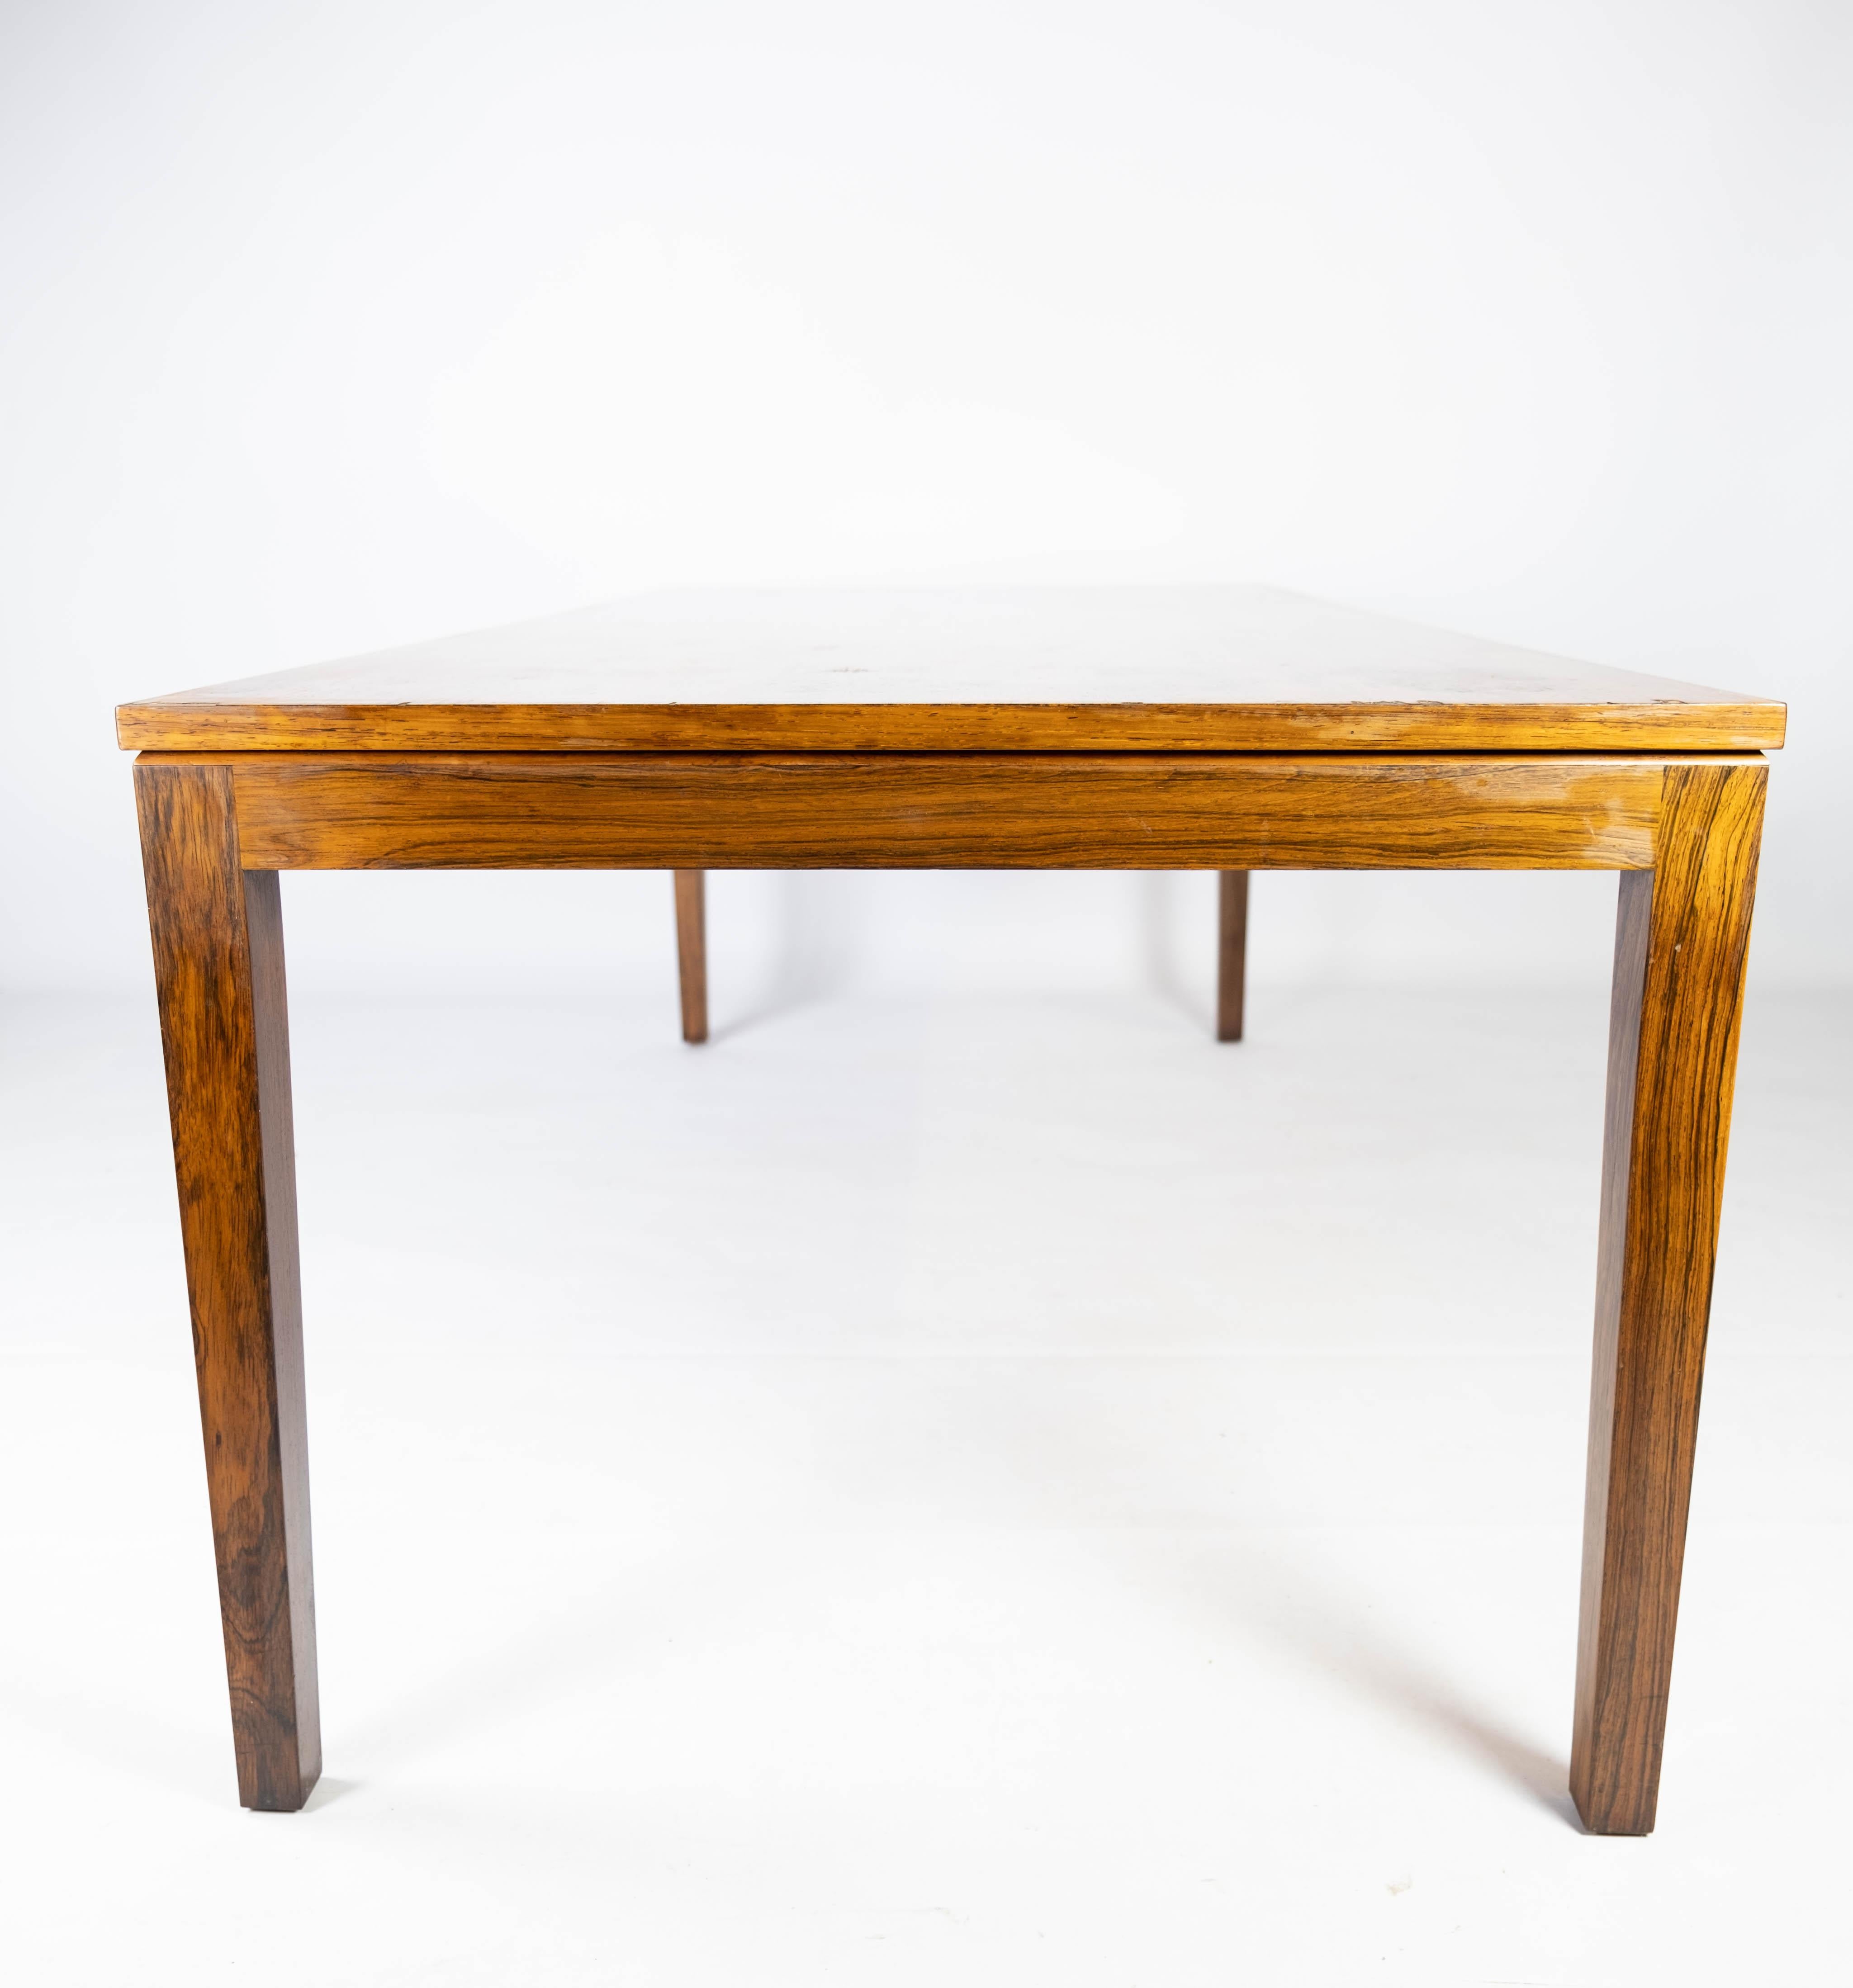 Coffee Table Made In Rosewood, Danish Design From 1960s For Sale 6